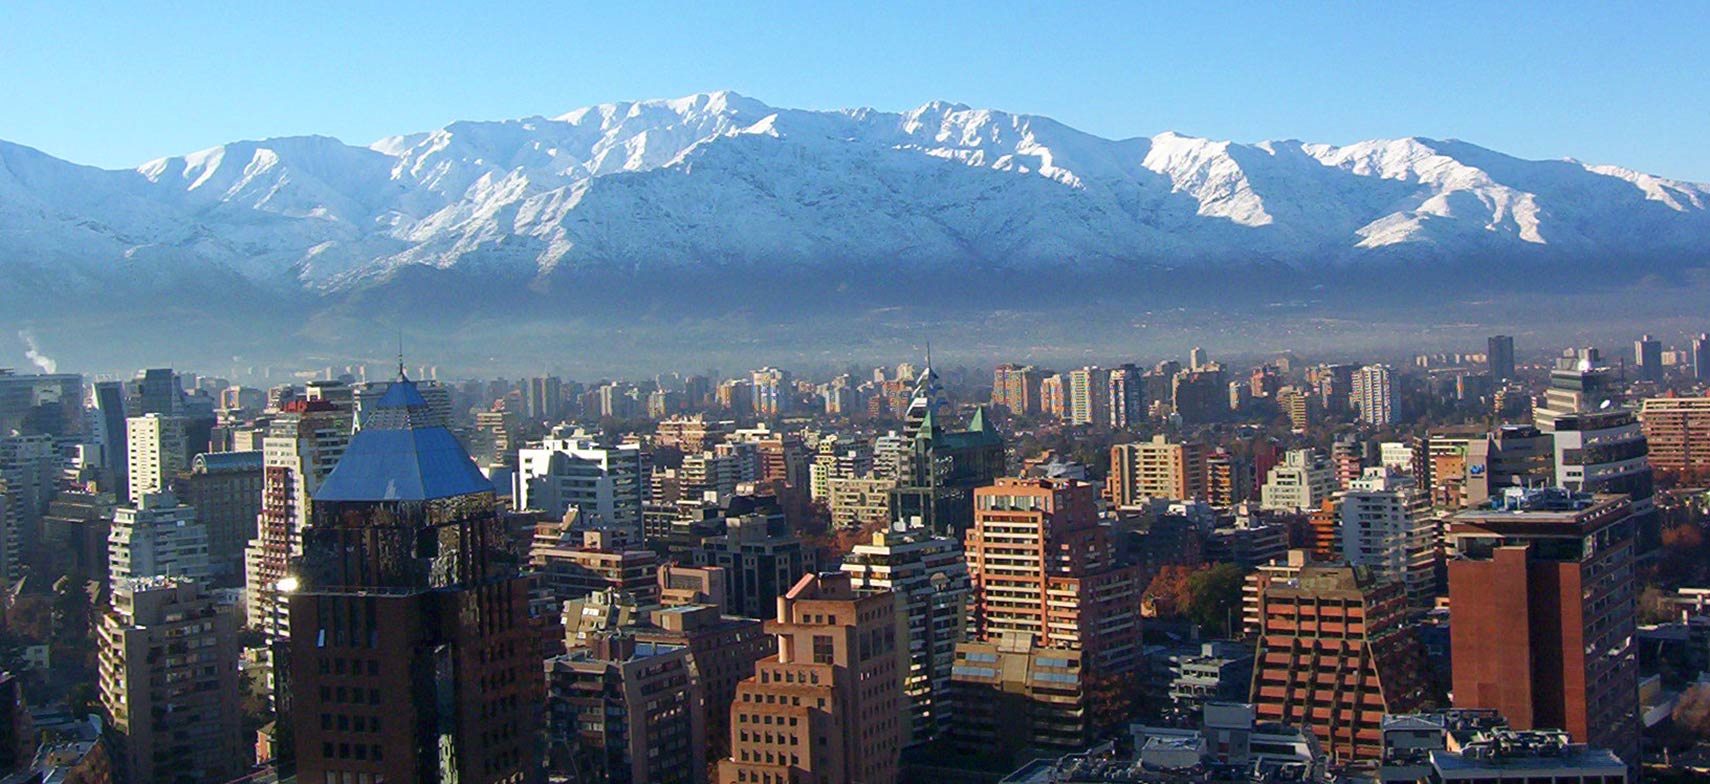 Santiago de Chile with part of the Andes mountain range